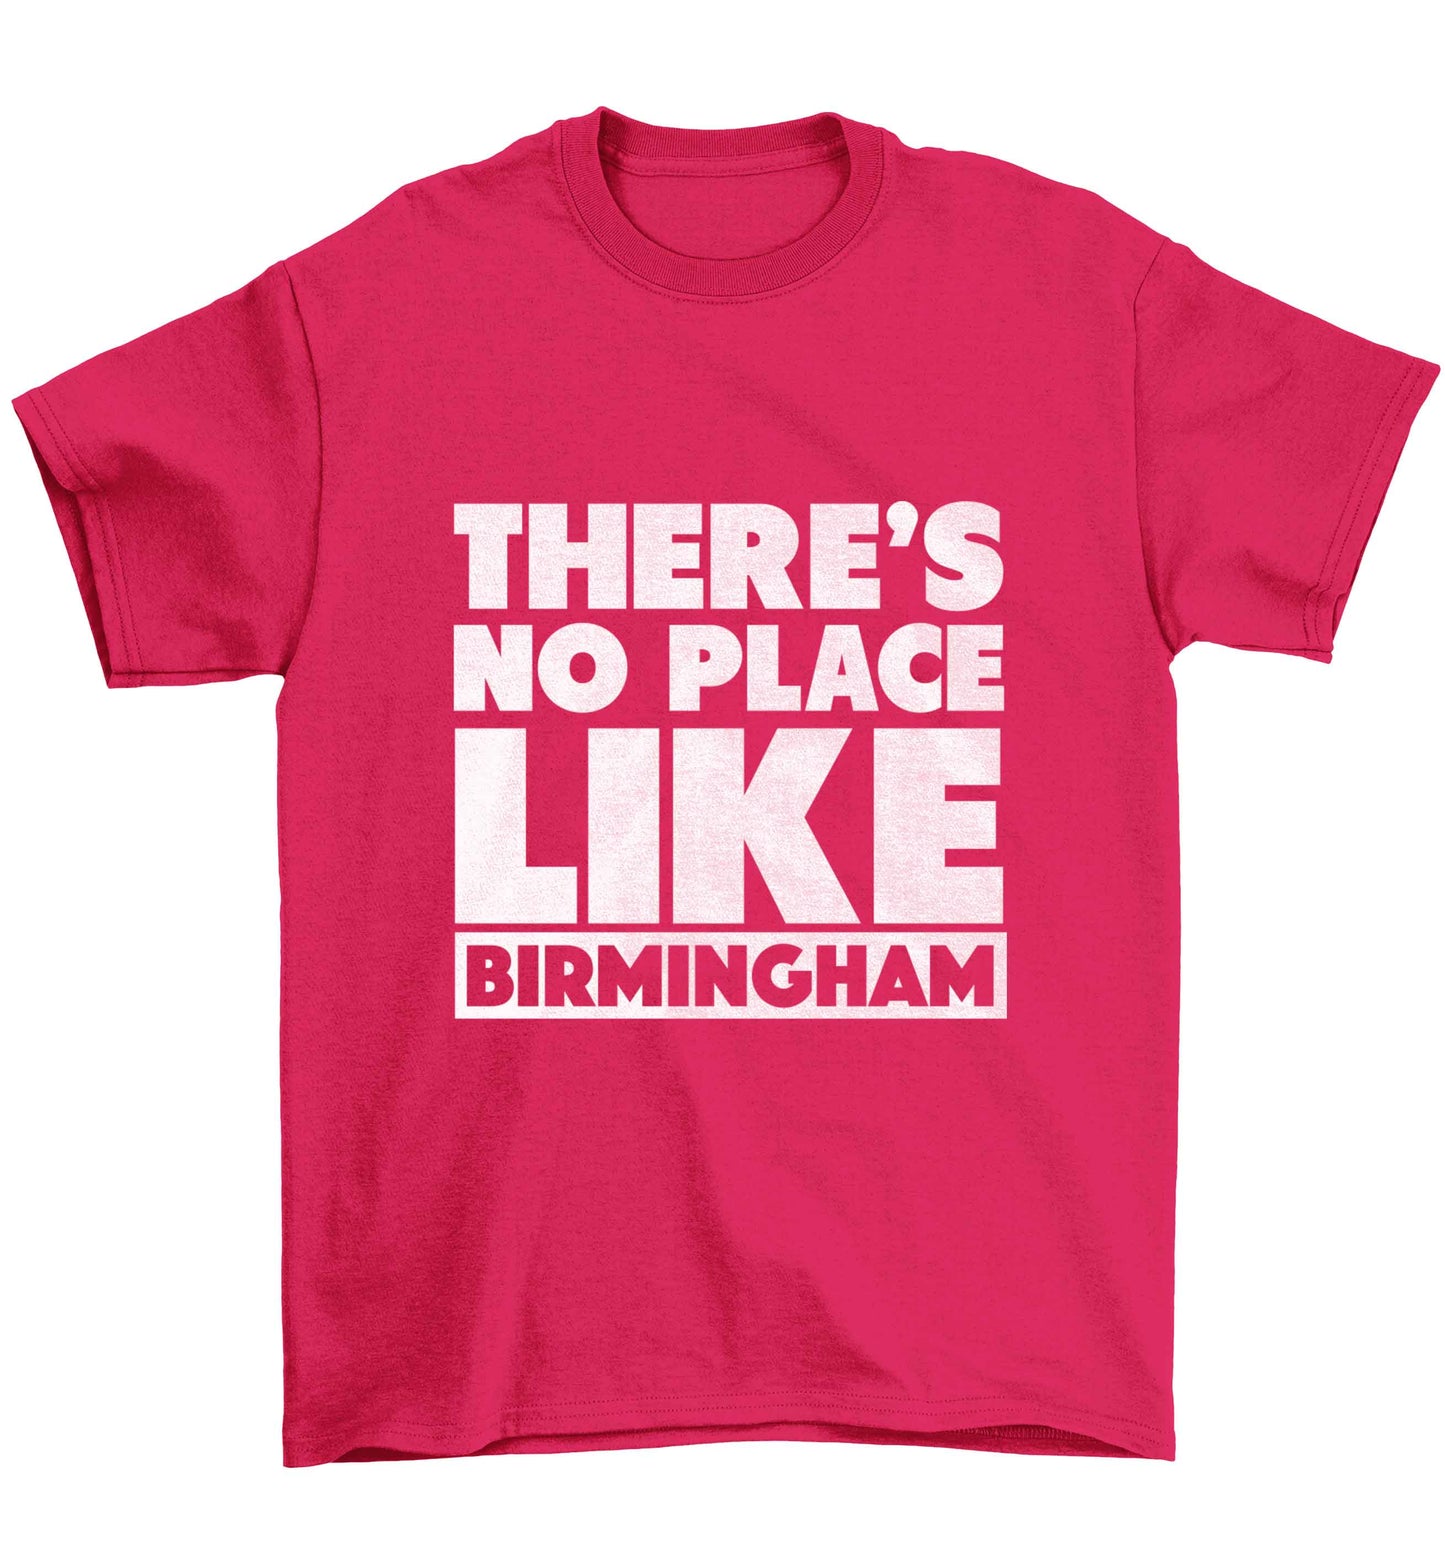 There's no place like Birmingham Children's pink Tshirt 12-13 Years